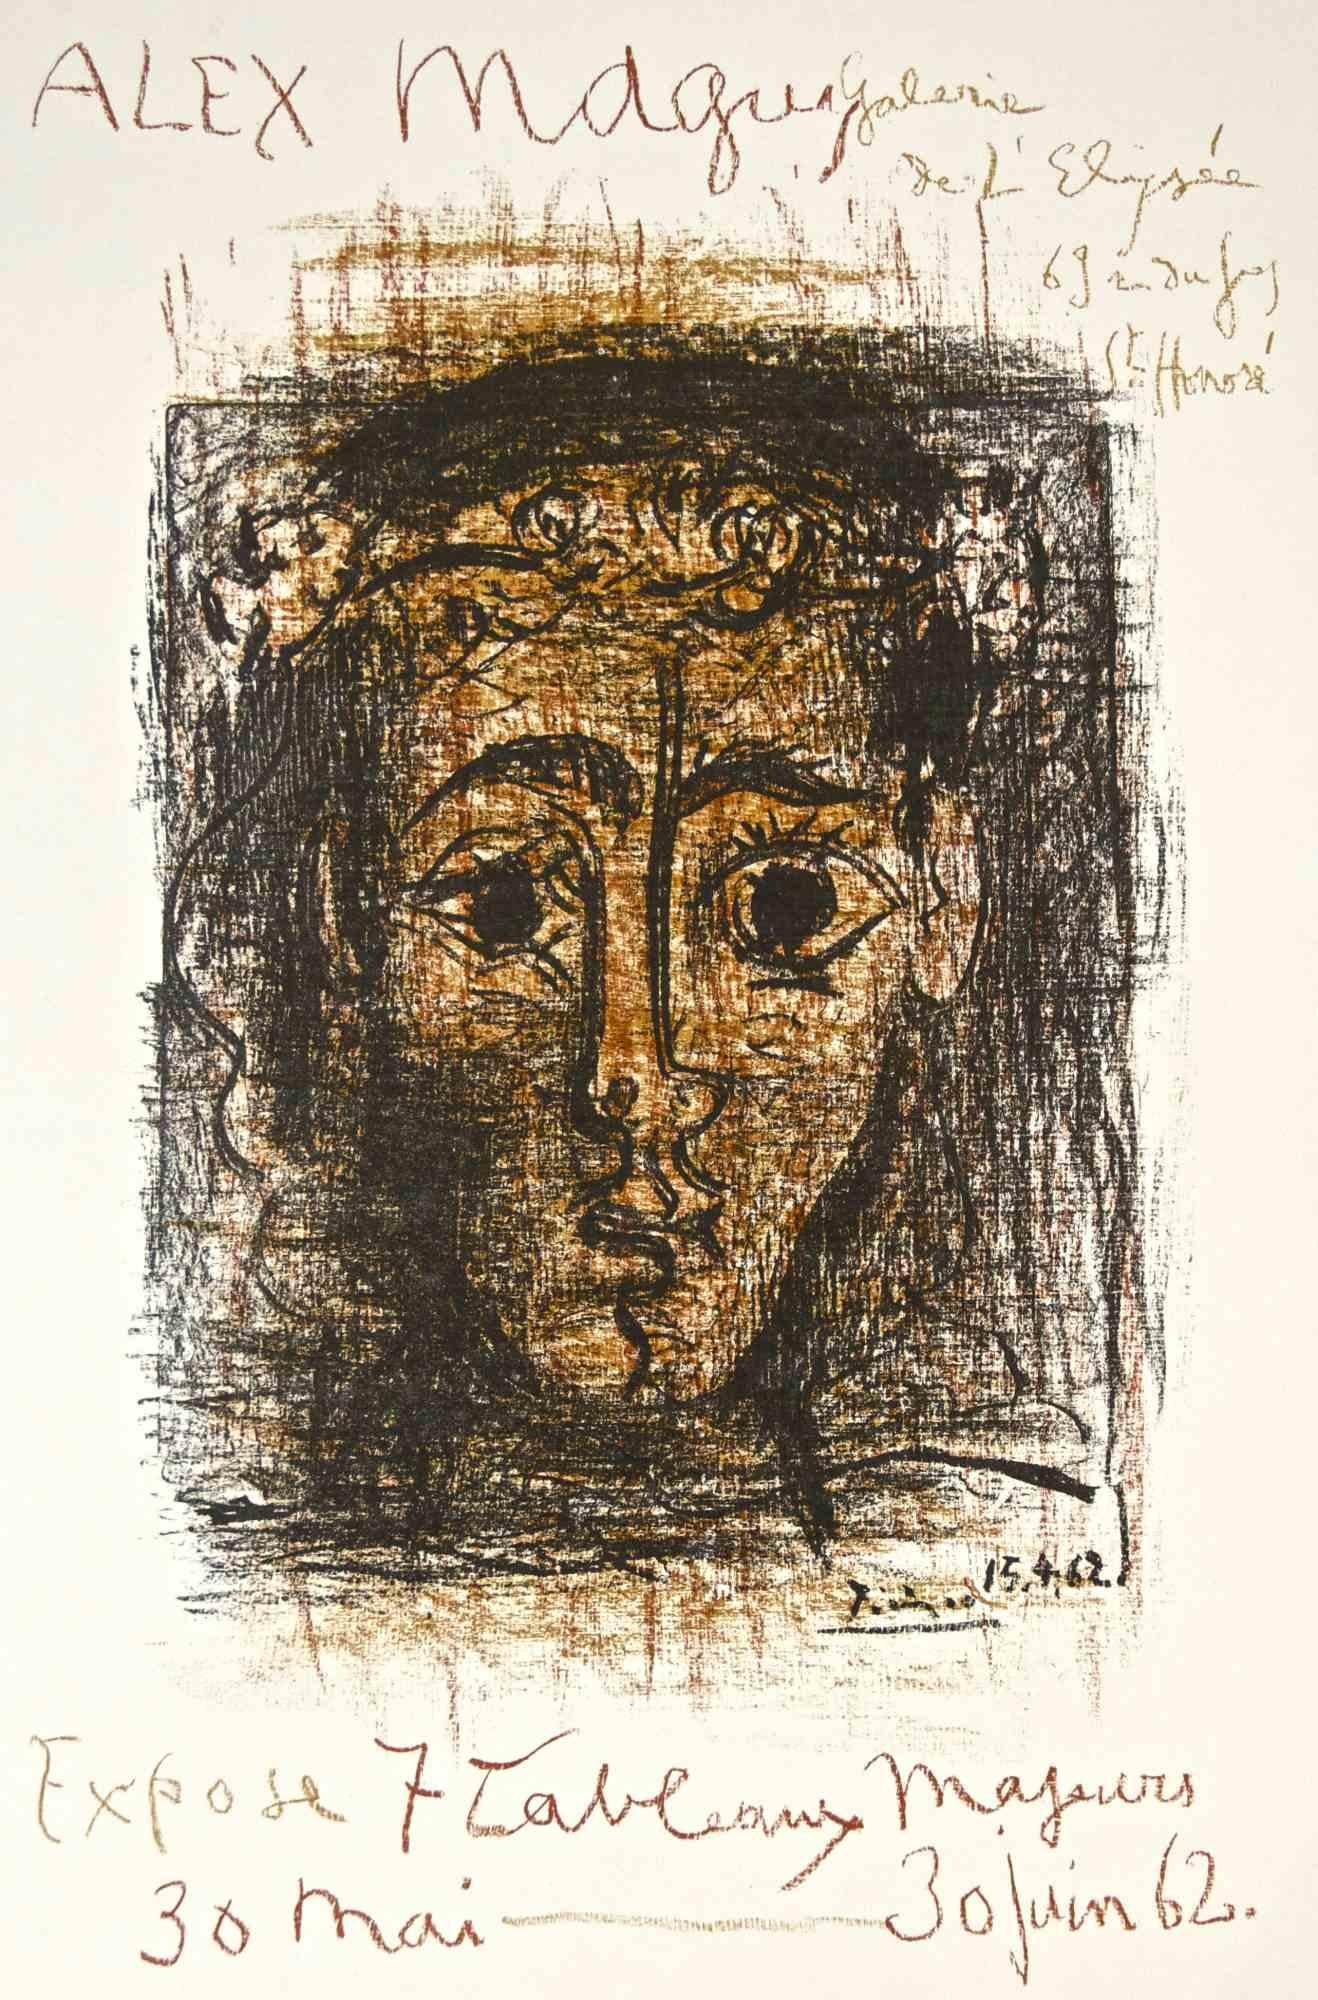 Exhibition Alex Maguy - Lithograph by Pablo Picasso - 1962